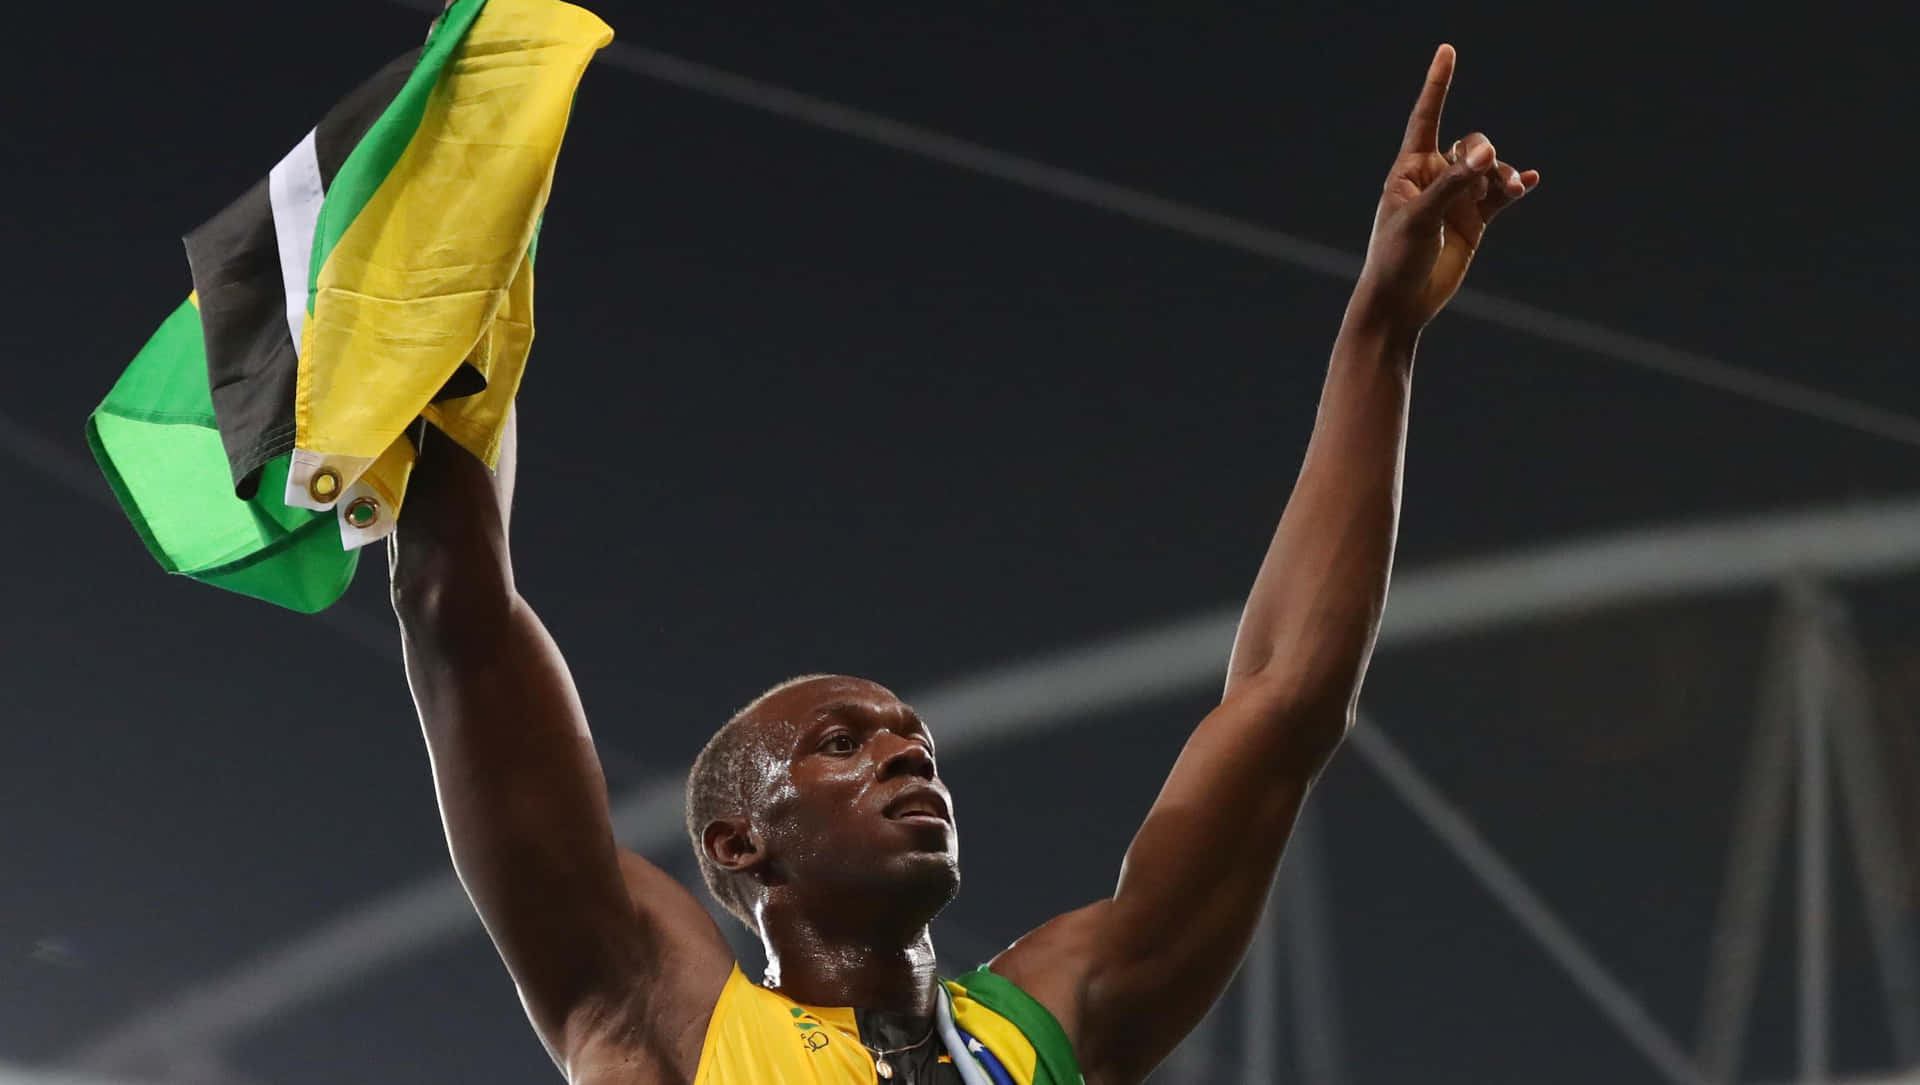 Usain Bolt Triumphantly Cheering with Jamaican Flag Wallpaper